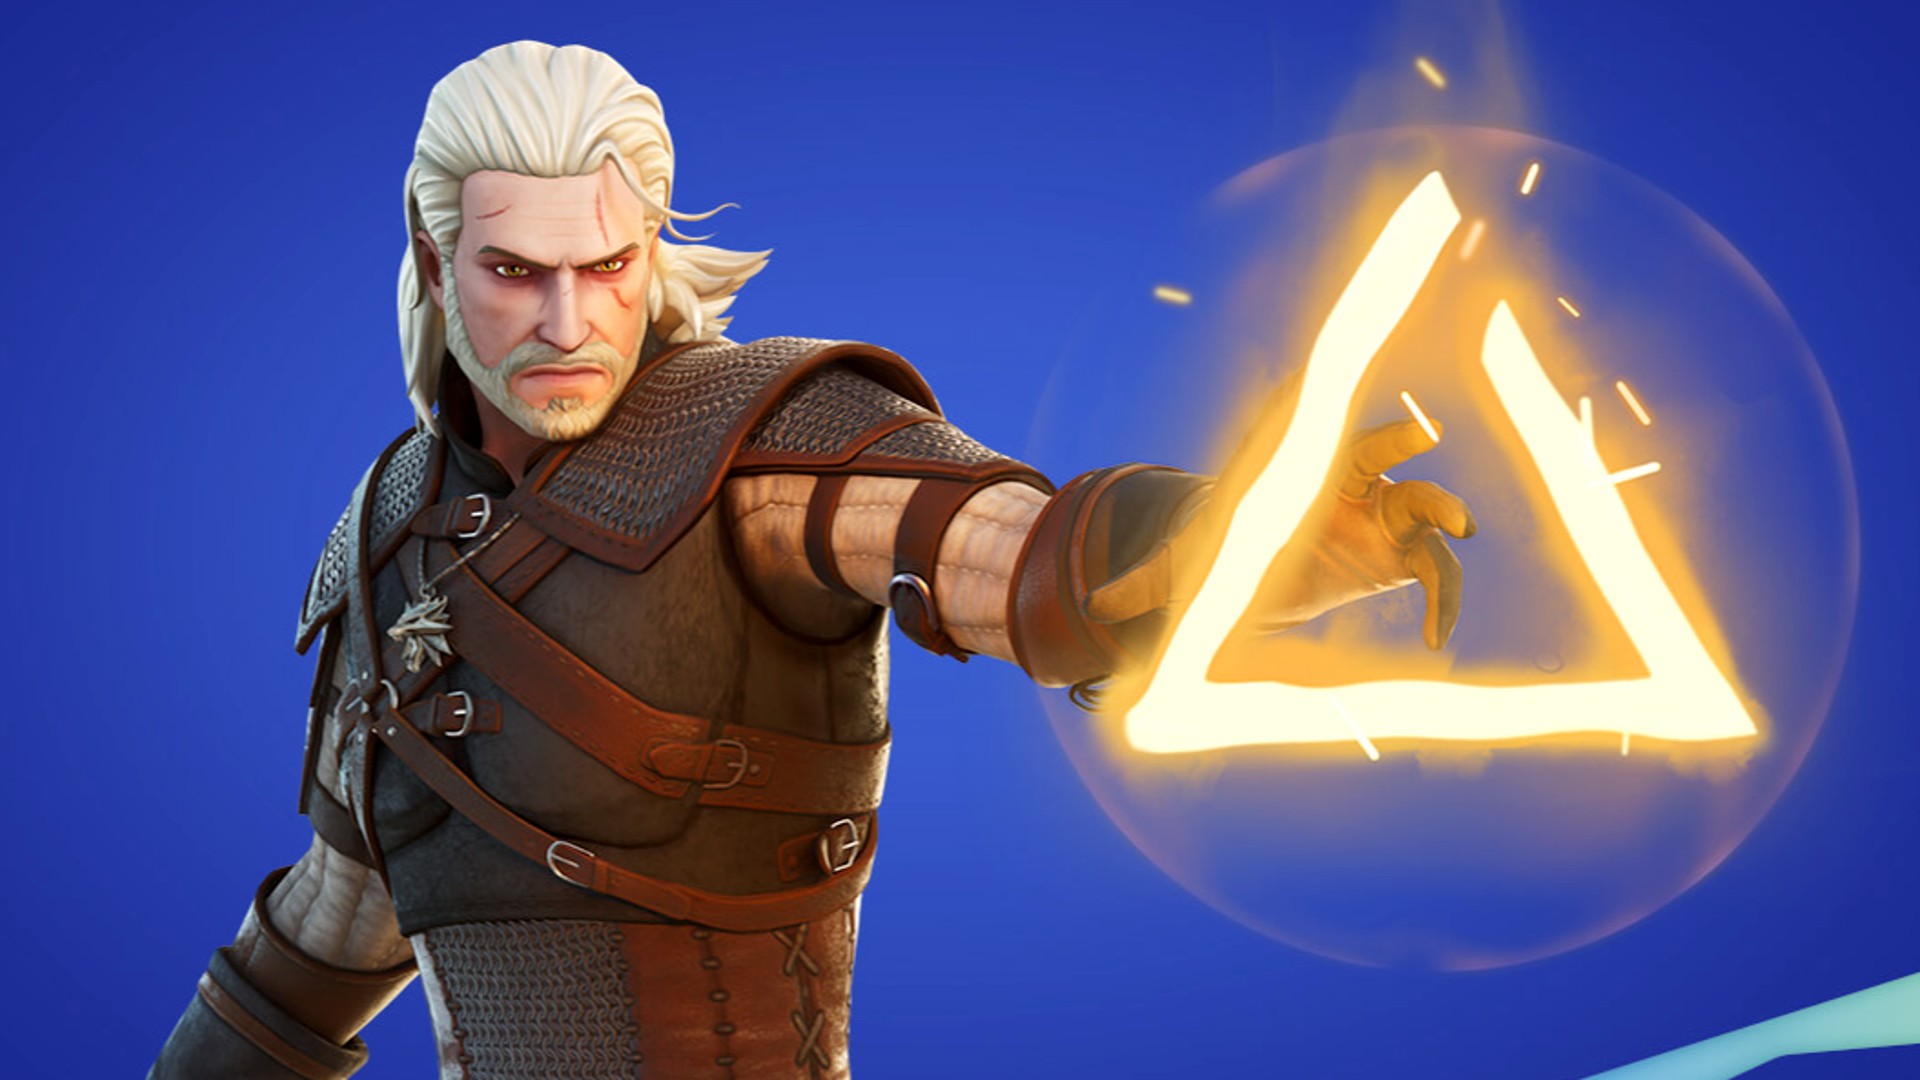 How to complete Fortnite Geralt of Rivia quests